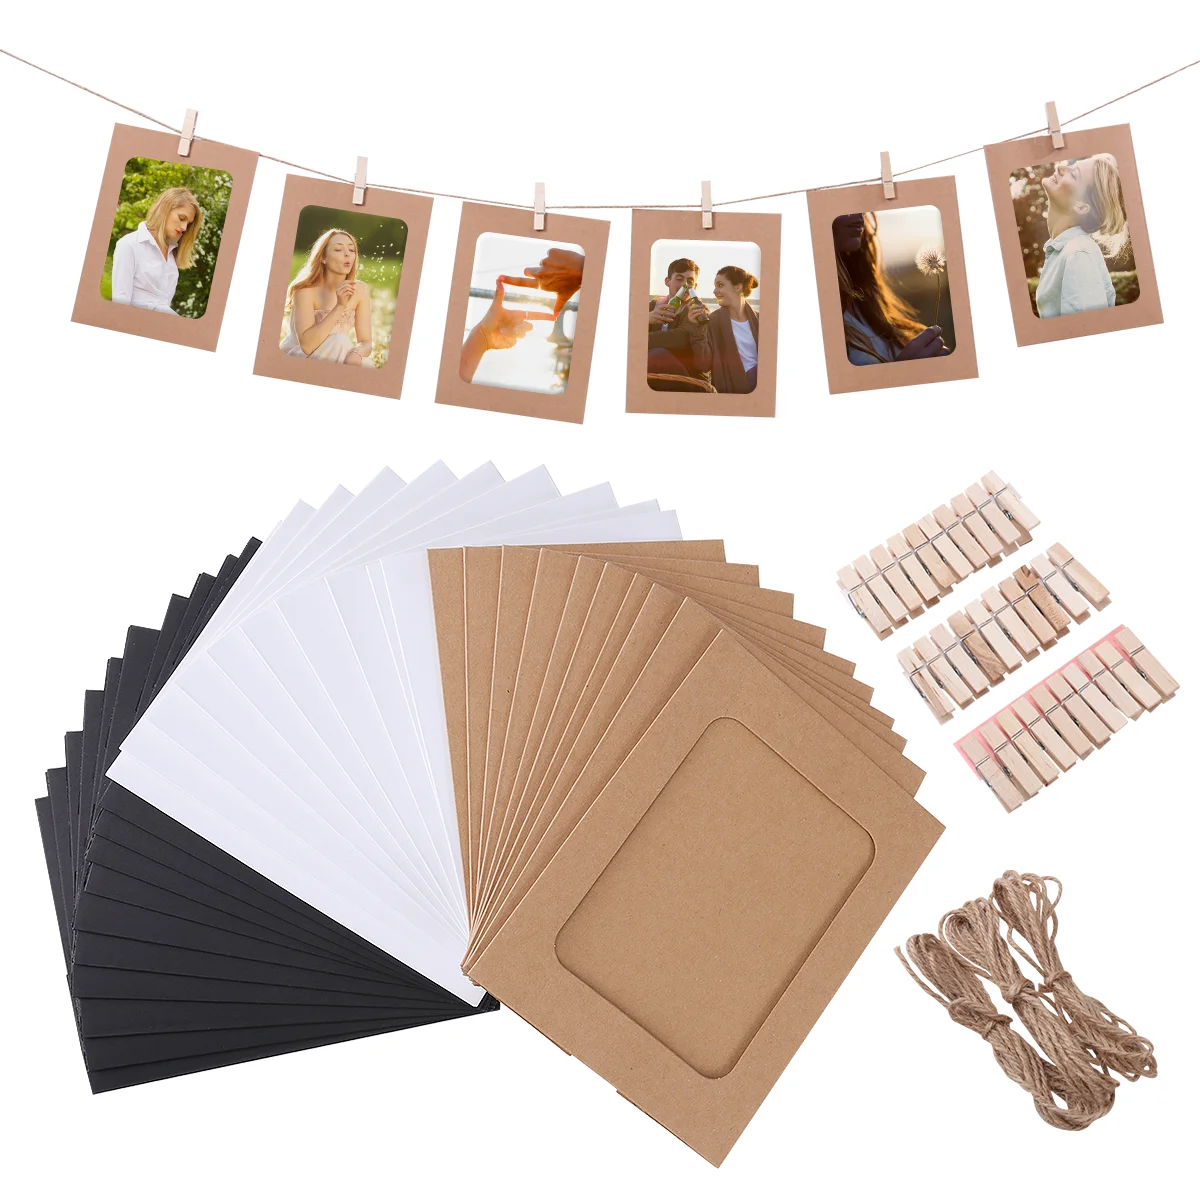 

Frame Photo Picture Wall Frames 4X6 Display Paper Collage Hanging Tabletop Cardboard Decor Wallet Clipsornament Size Kraft